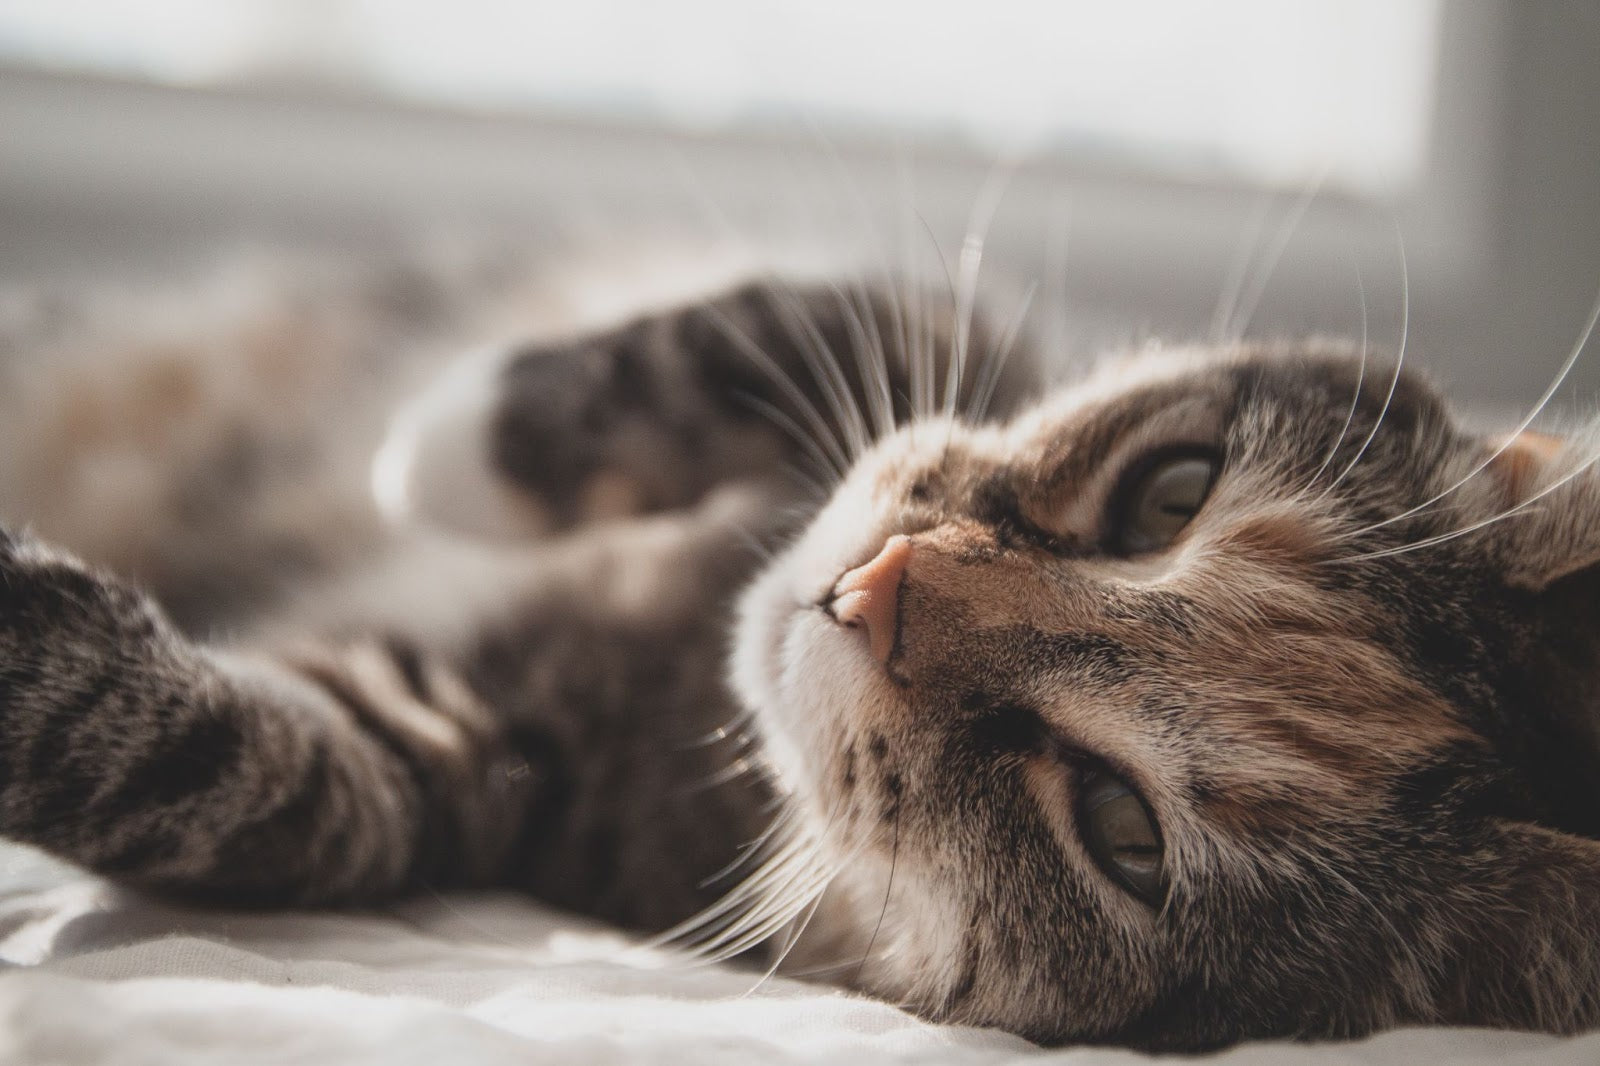 How Do Cats Purr And Why?